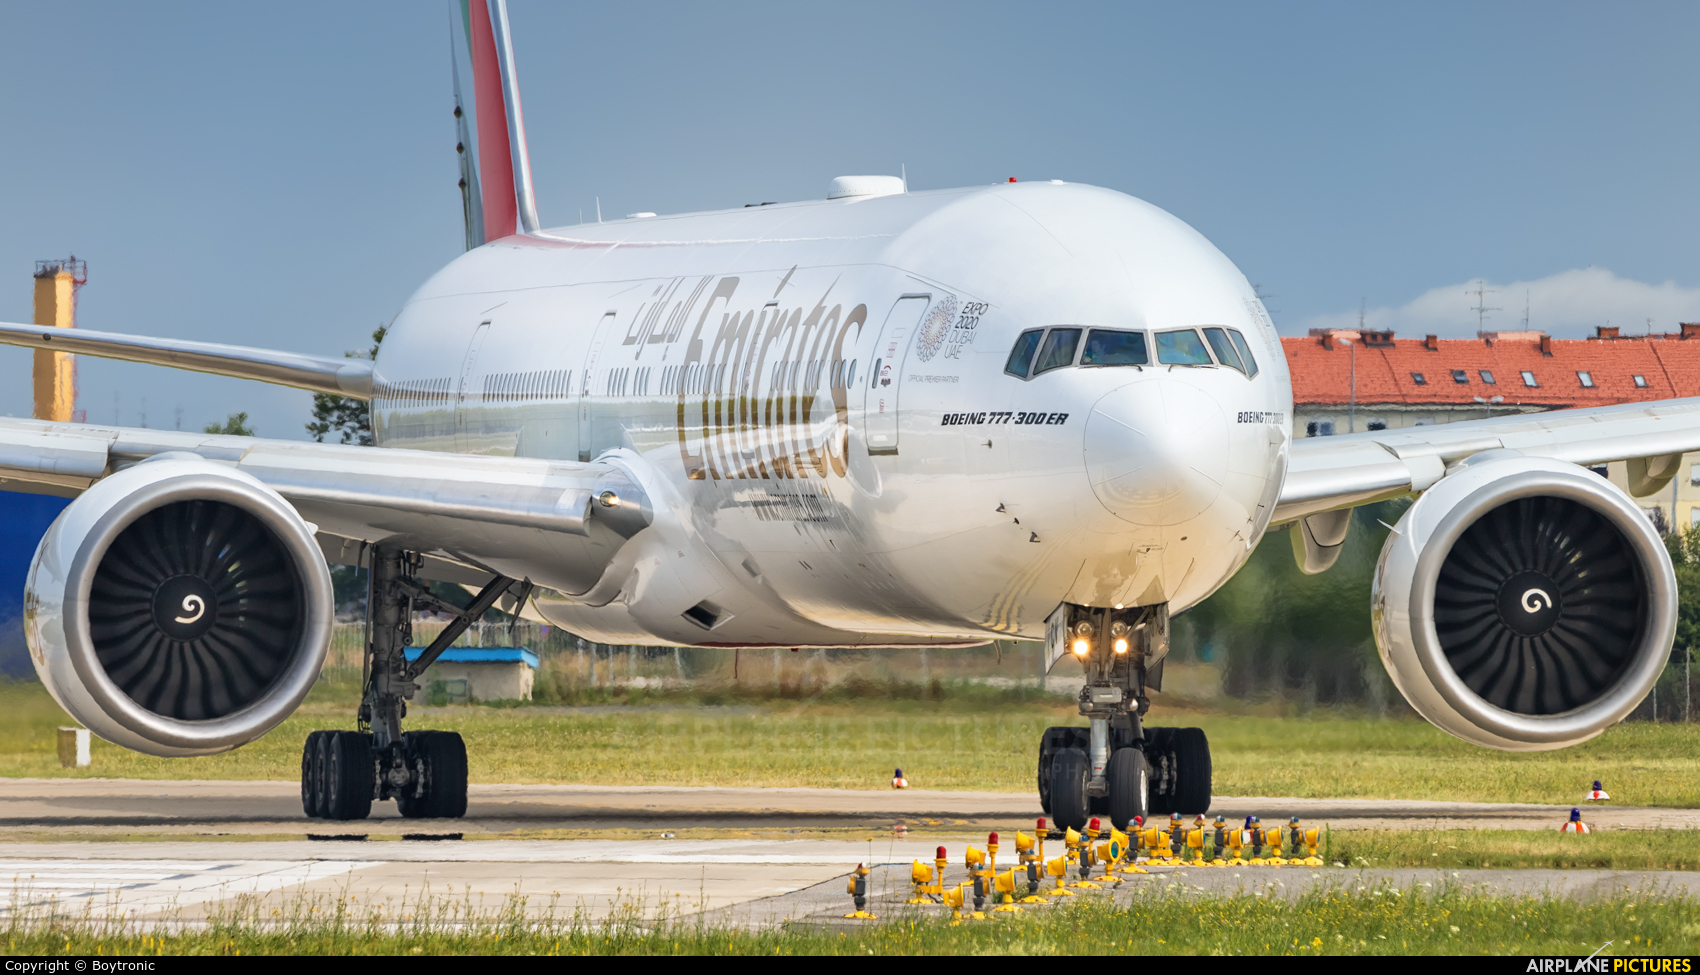 Emirates Airlines A6-ECV aircraft at Zagreb